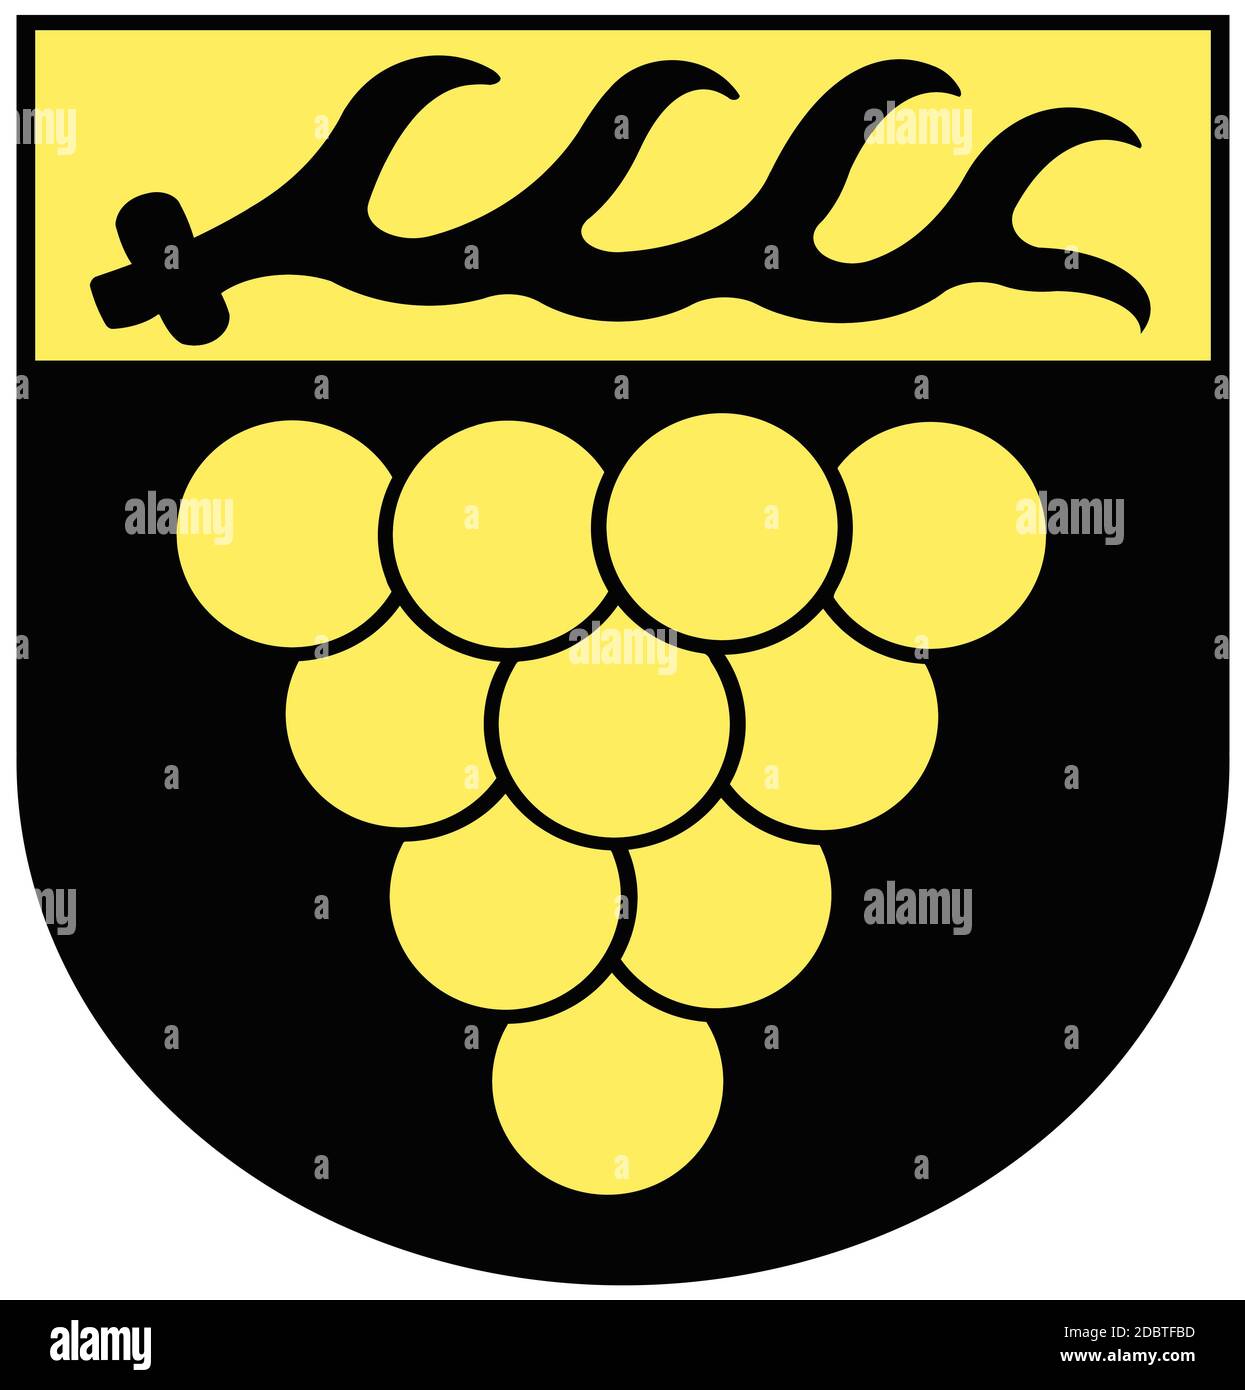 Coat of arms of the city of Weinstadt. Germany Stock Photo